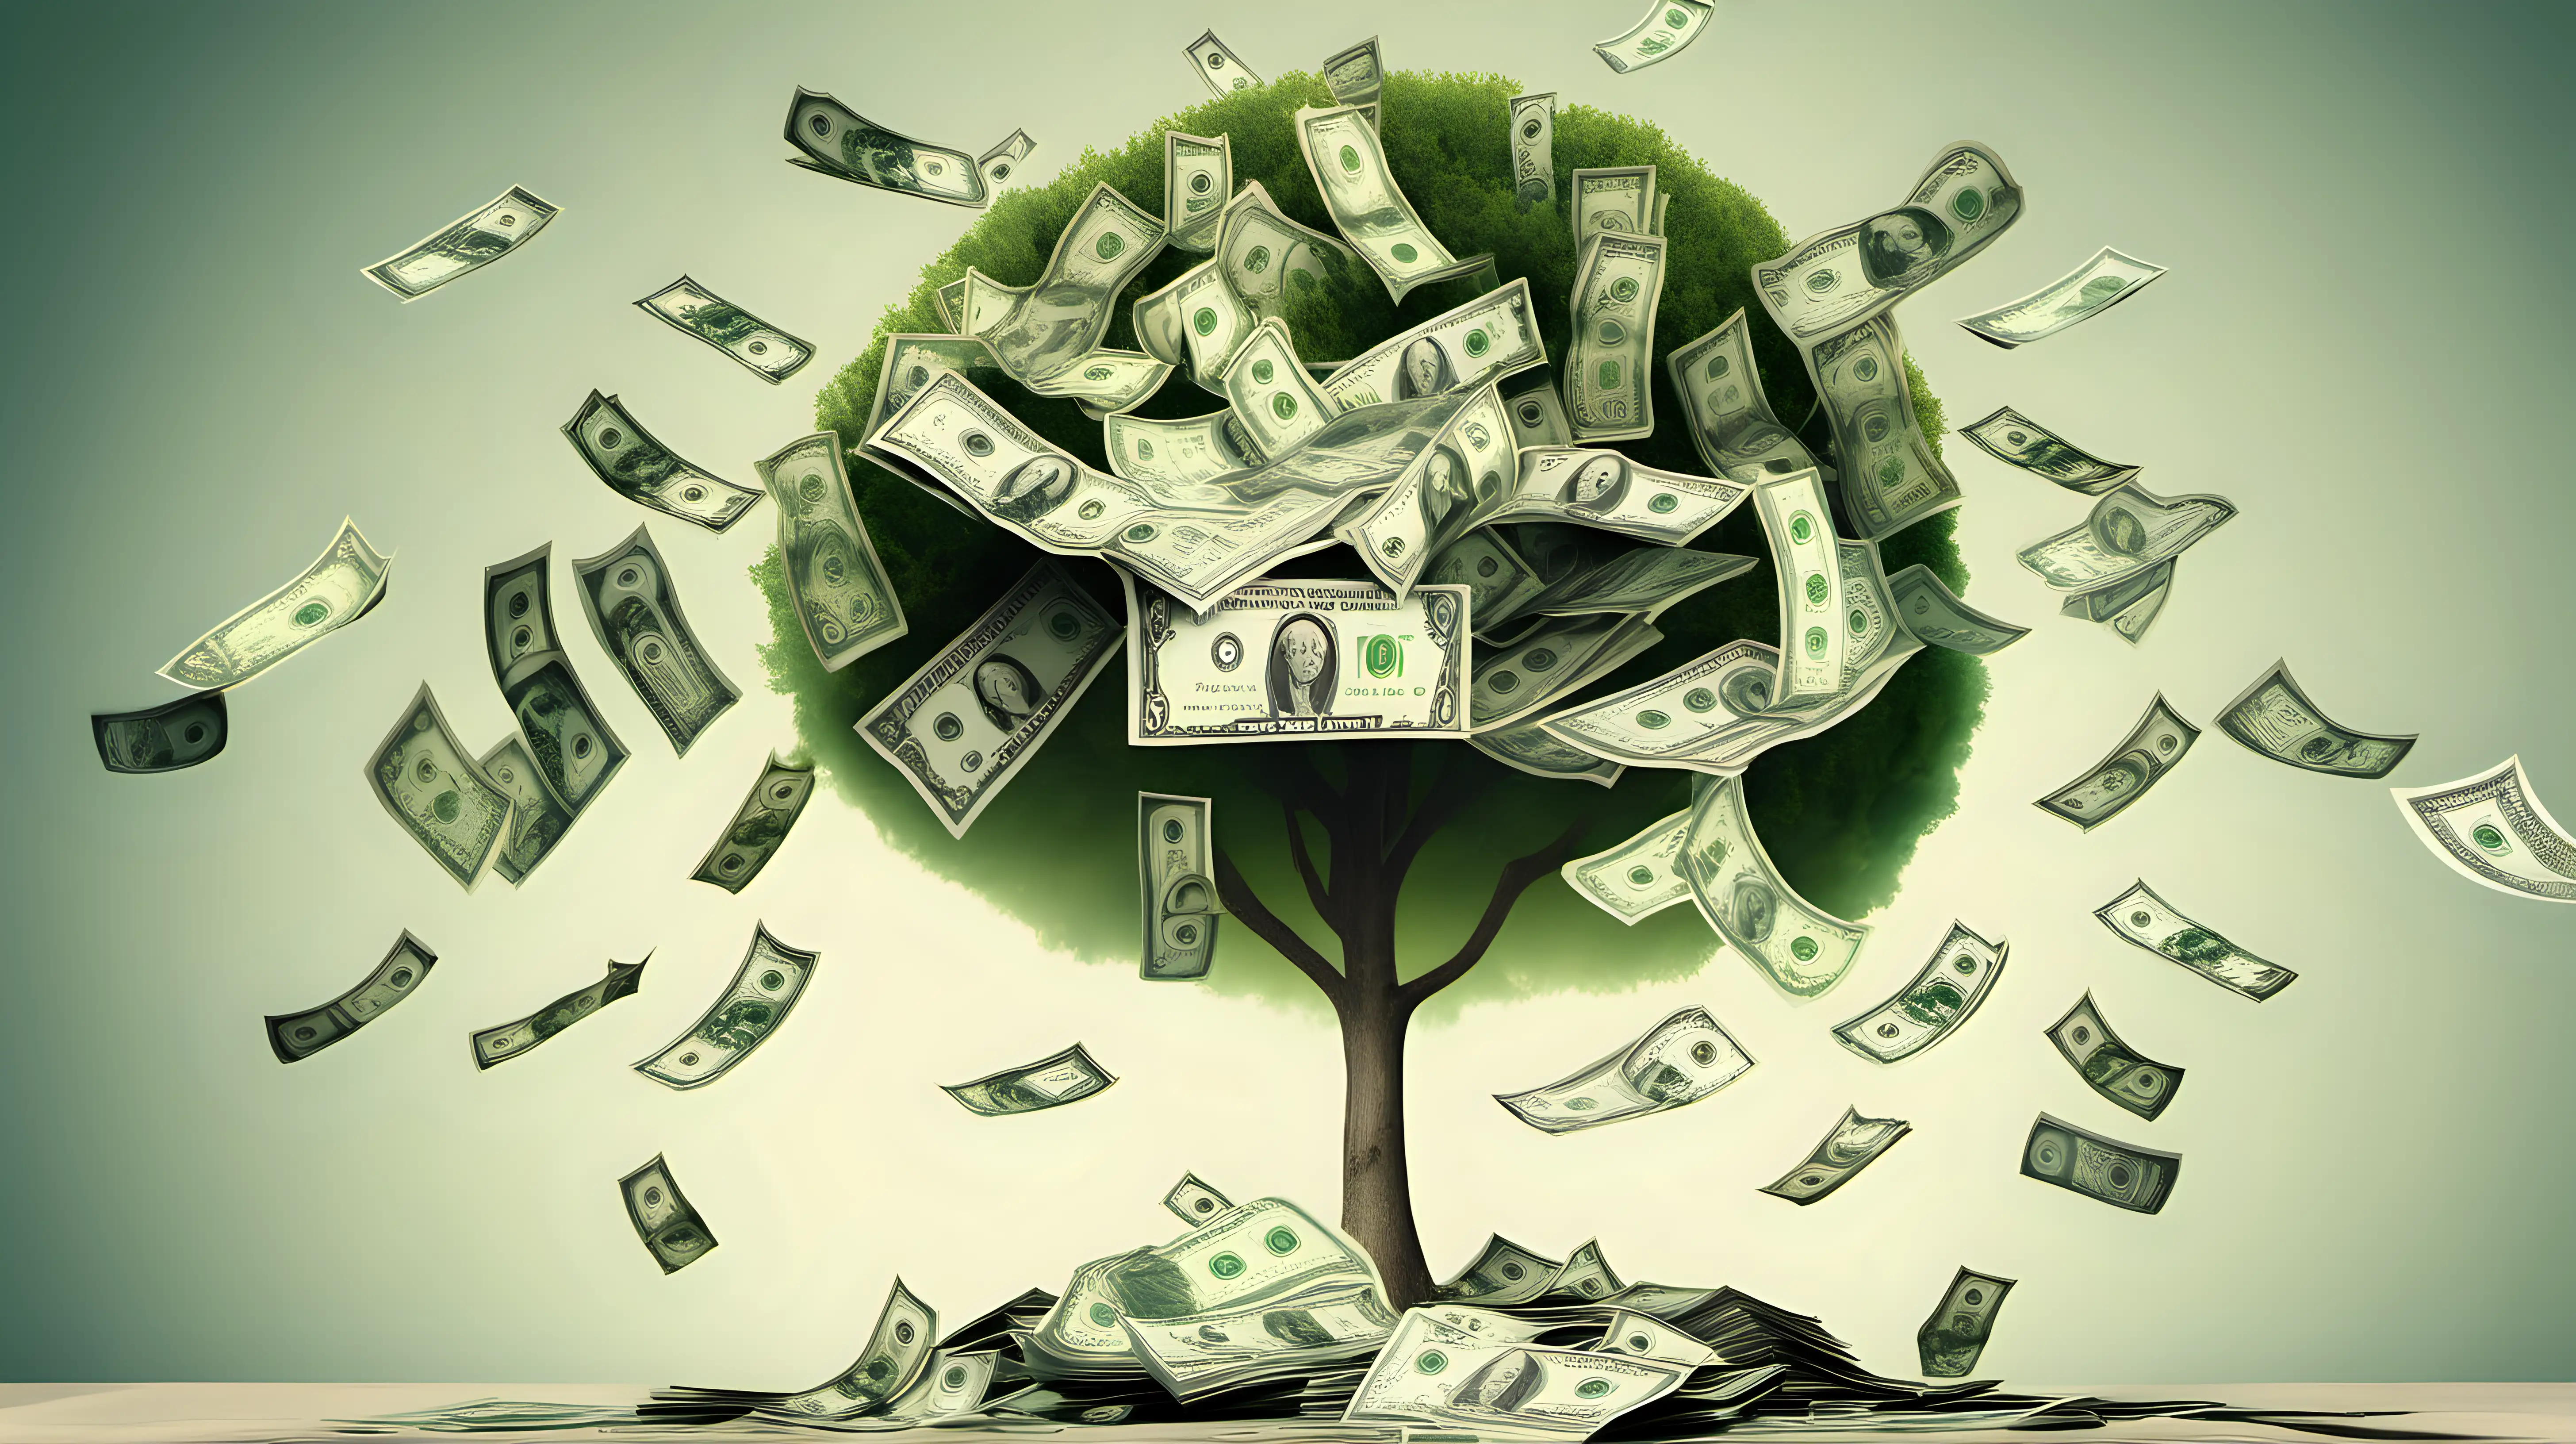 image of a tree that grows money instead of flowers